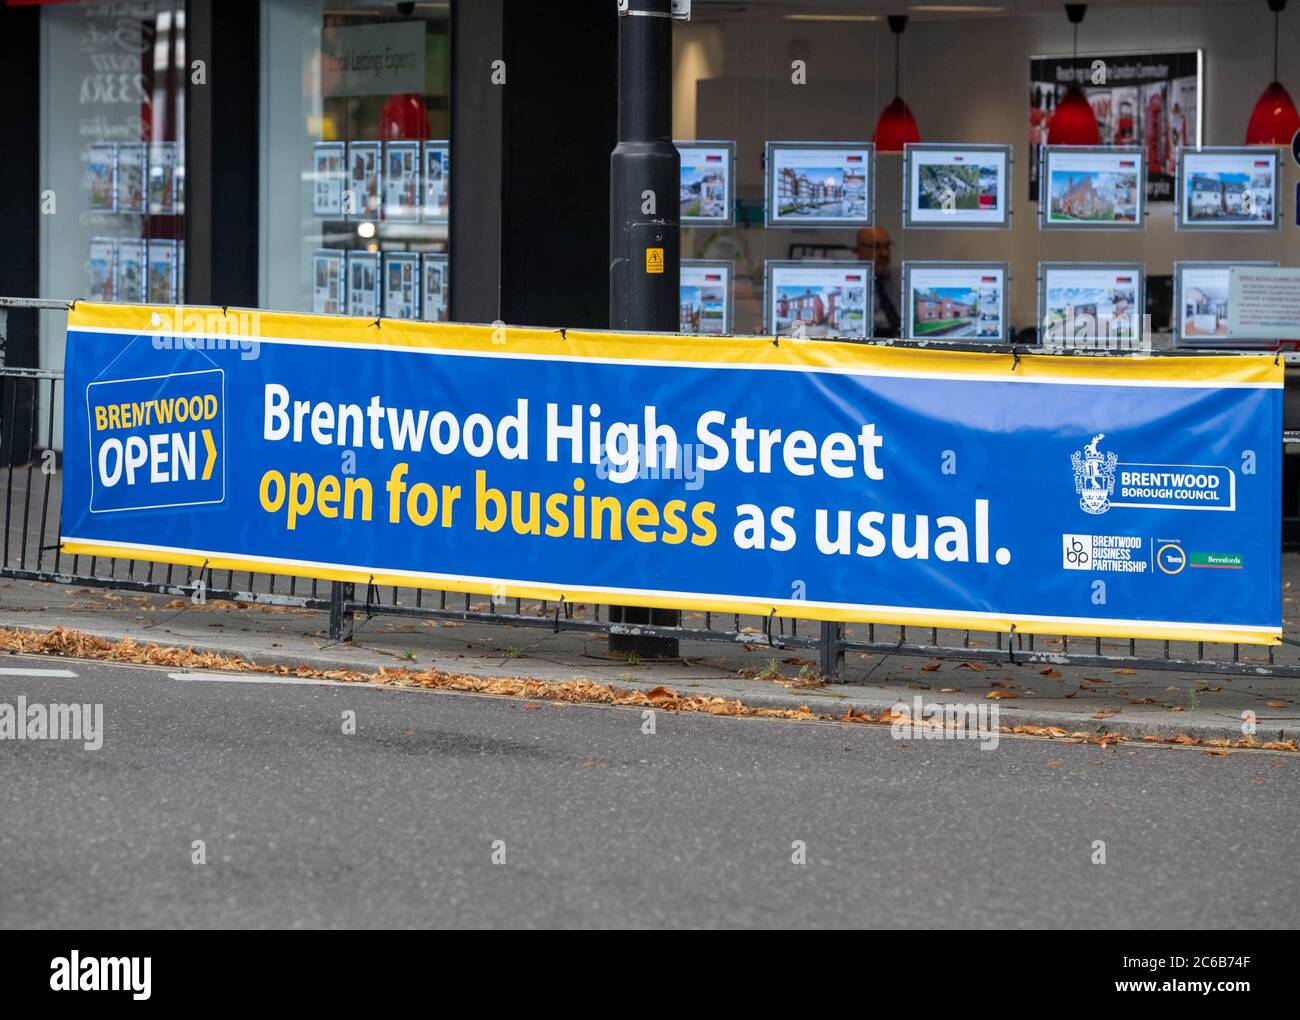 Brentwood High Street open for business as usual sign Stock Photo